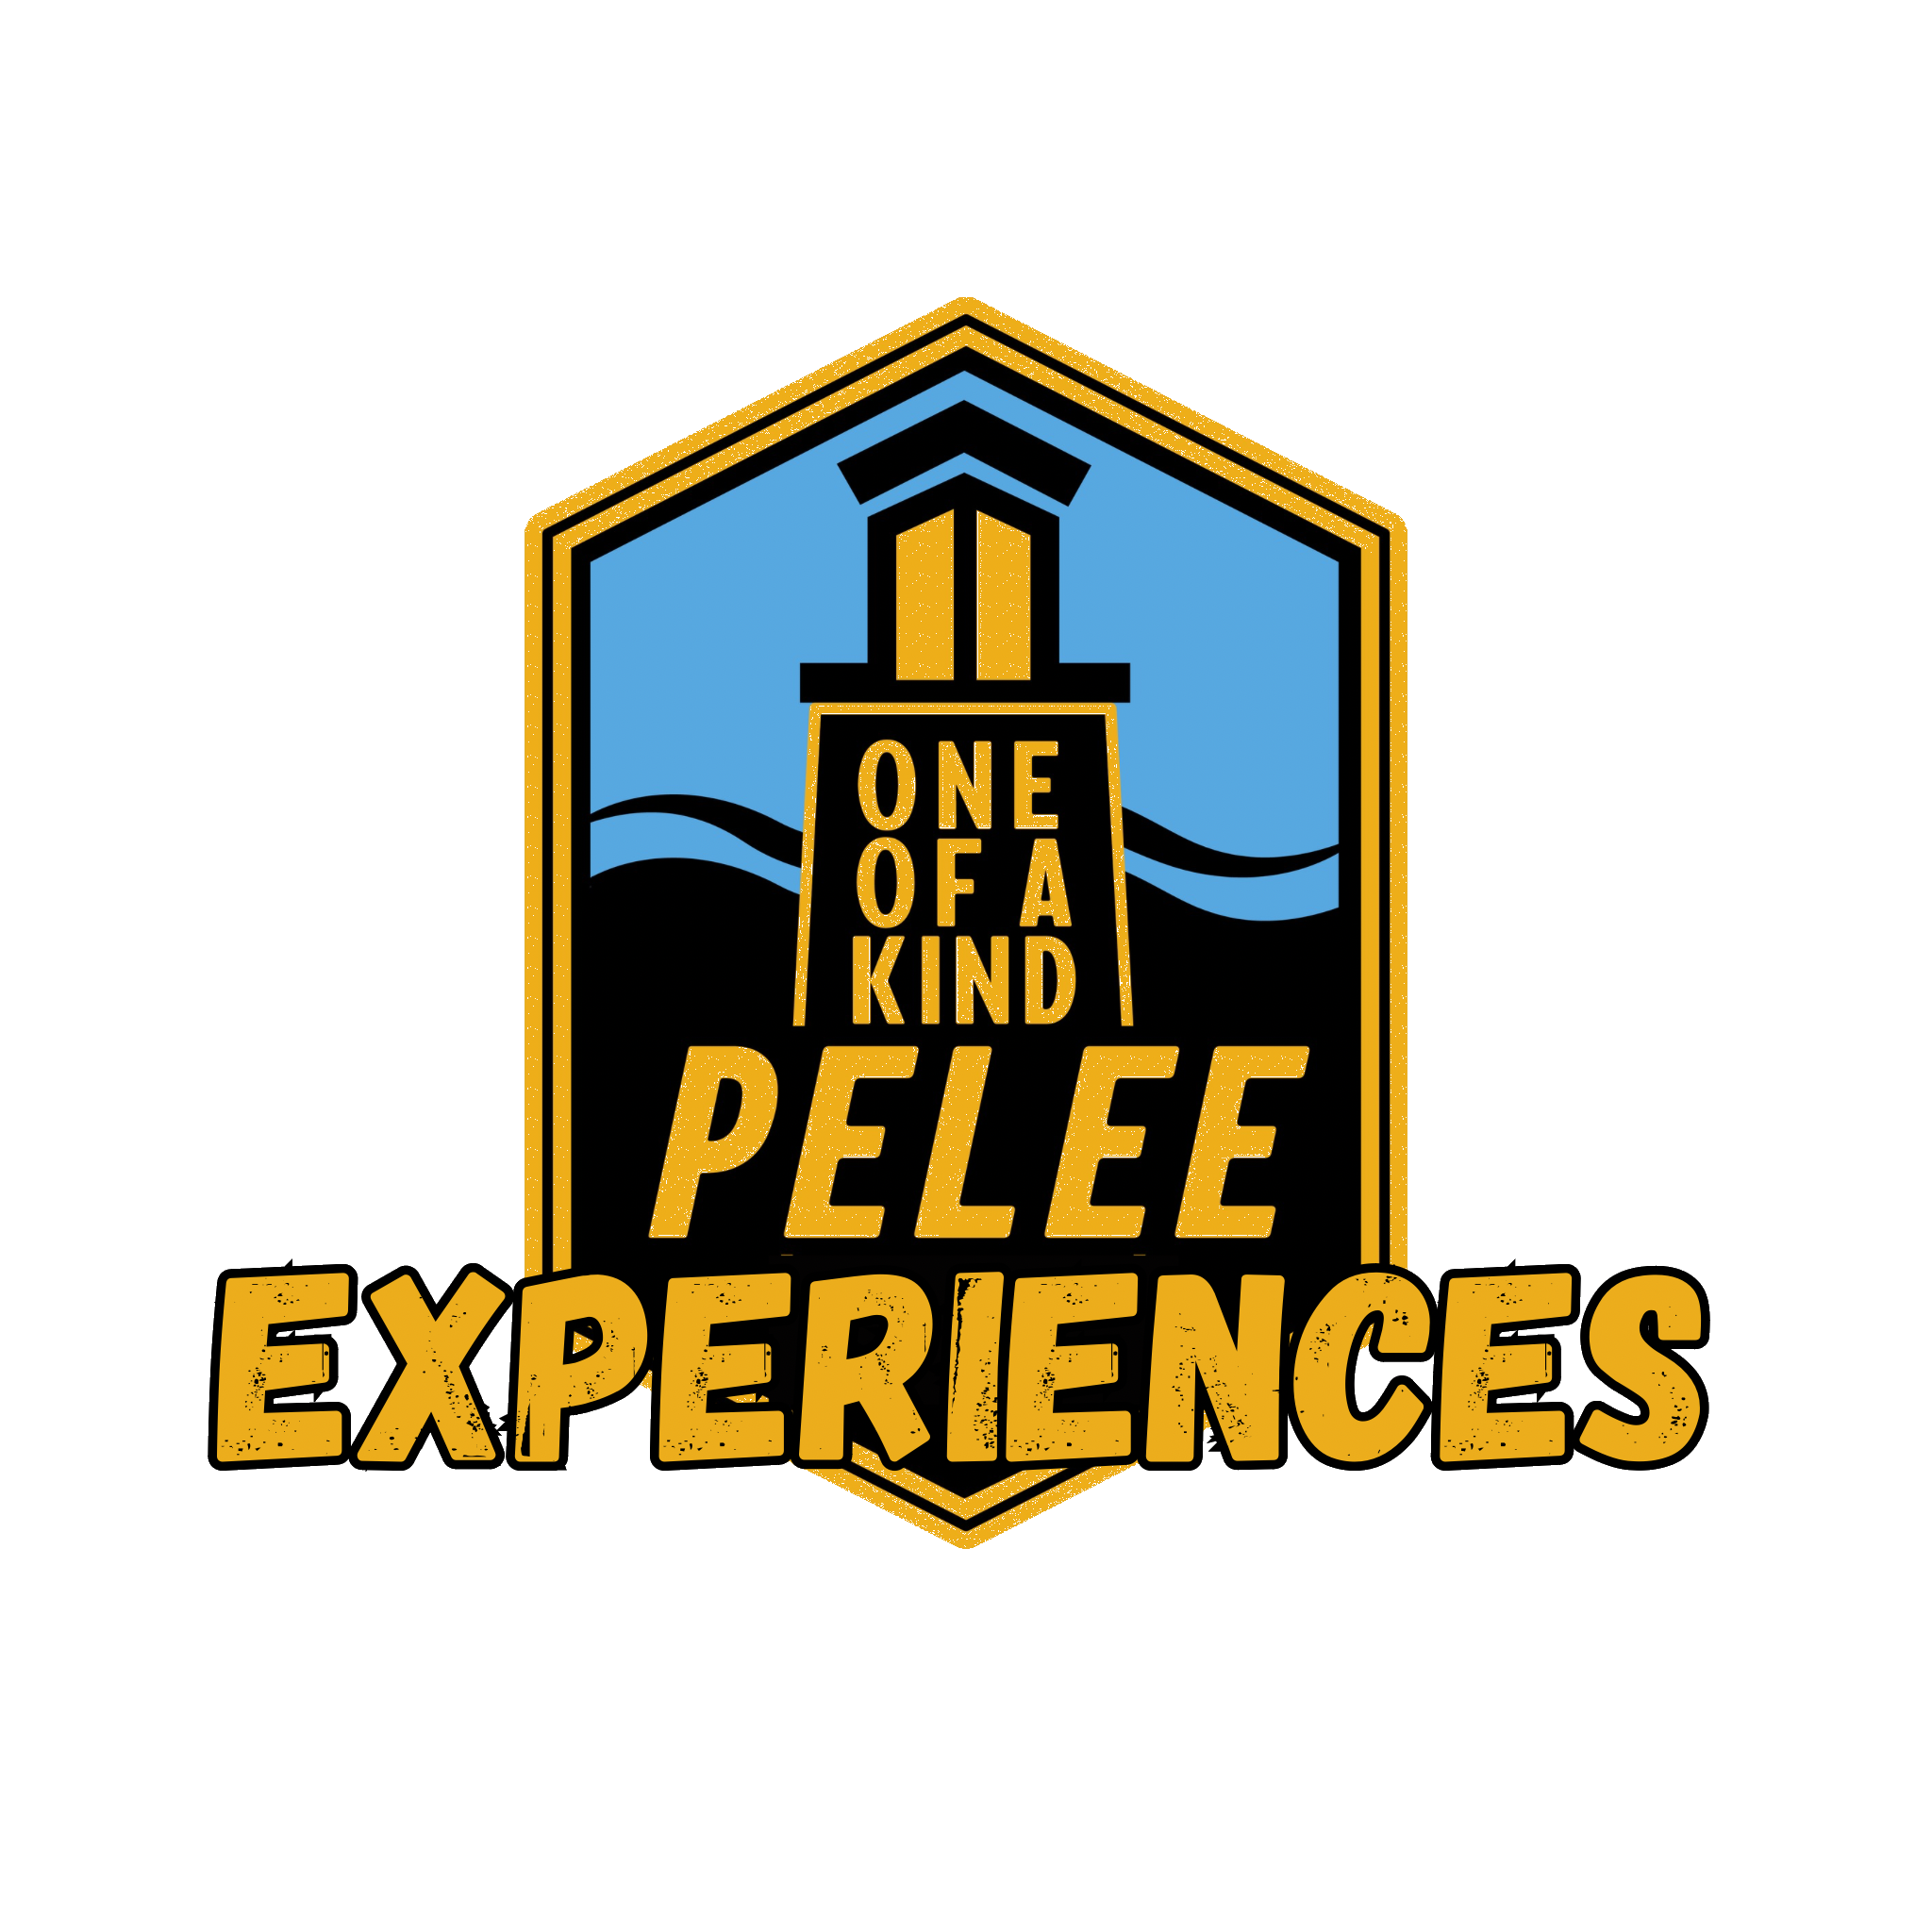 One of a Kind Pelee Experiences Logo